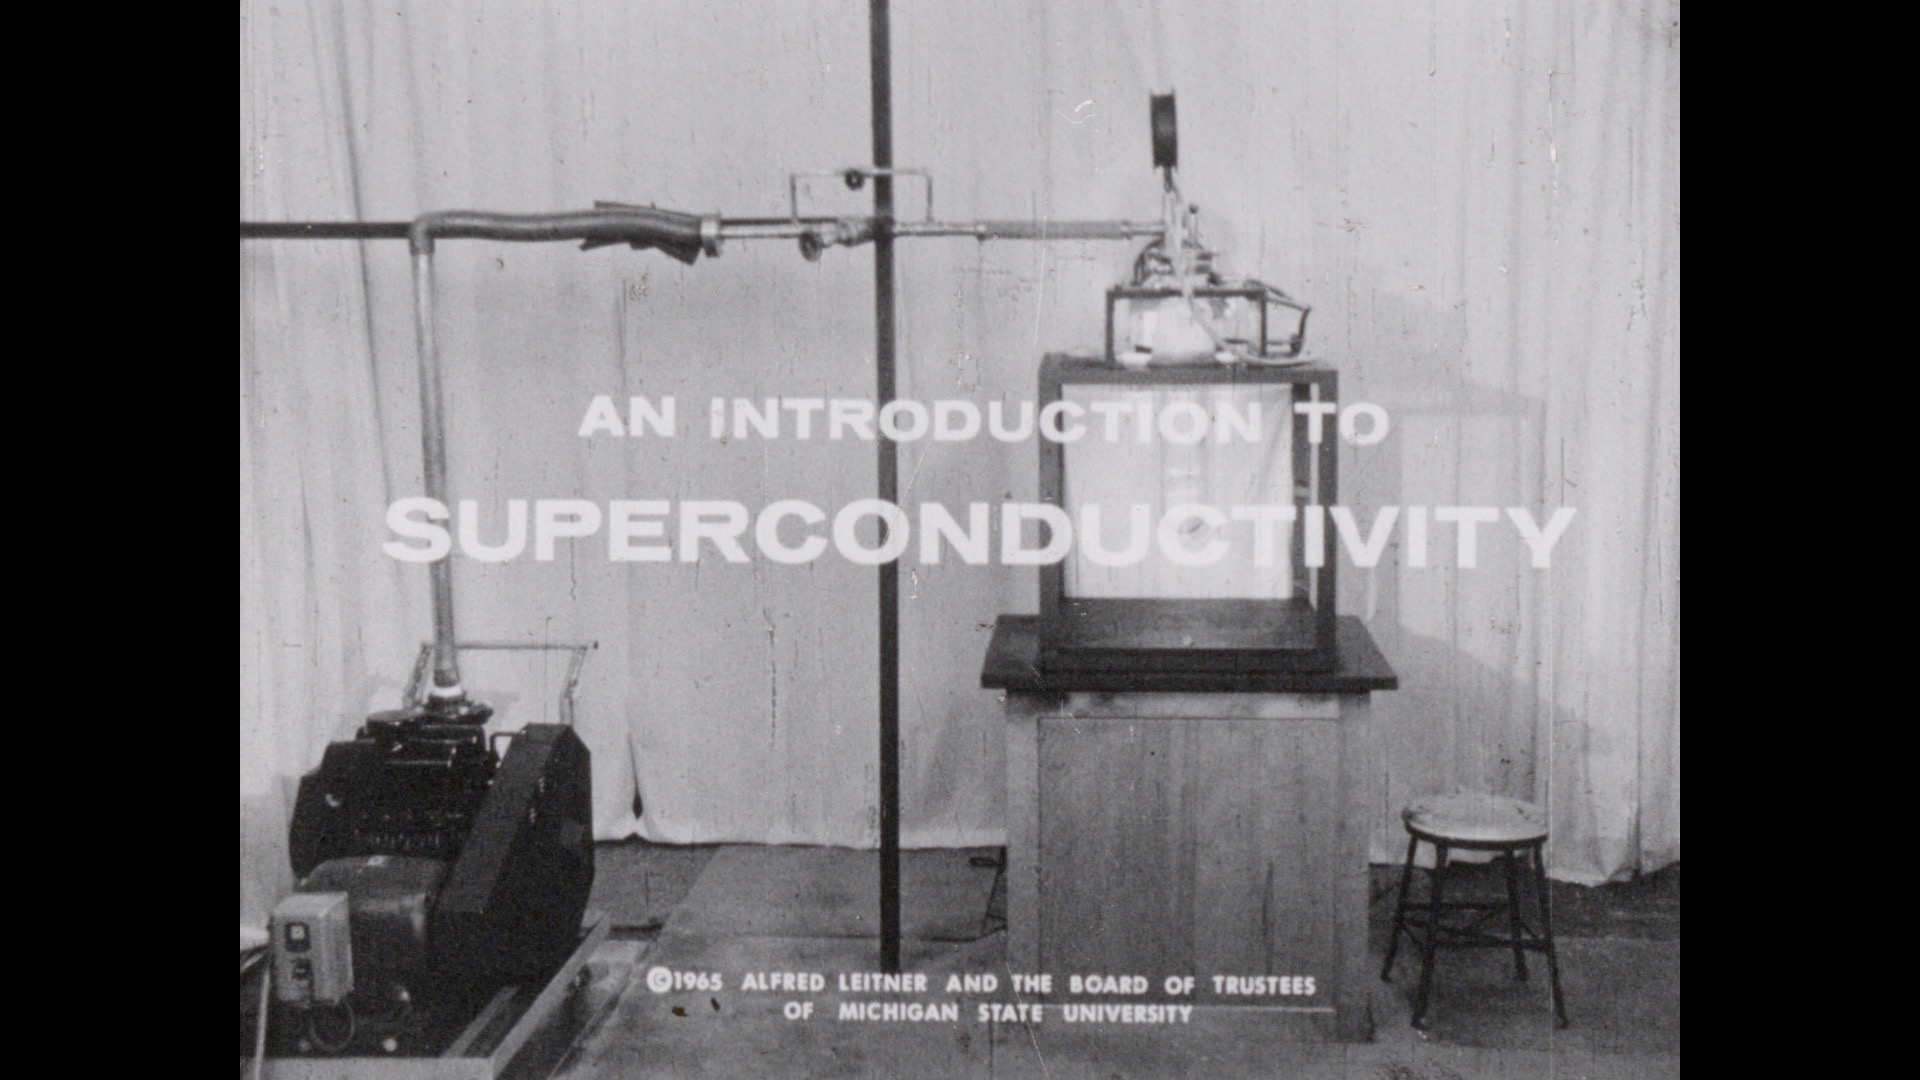 An Introduction to Superconductivity, 1965